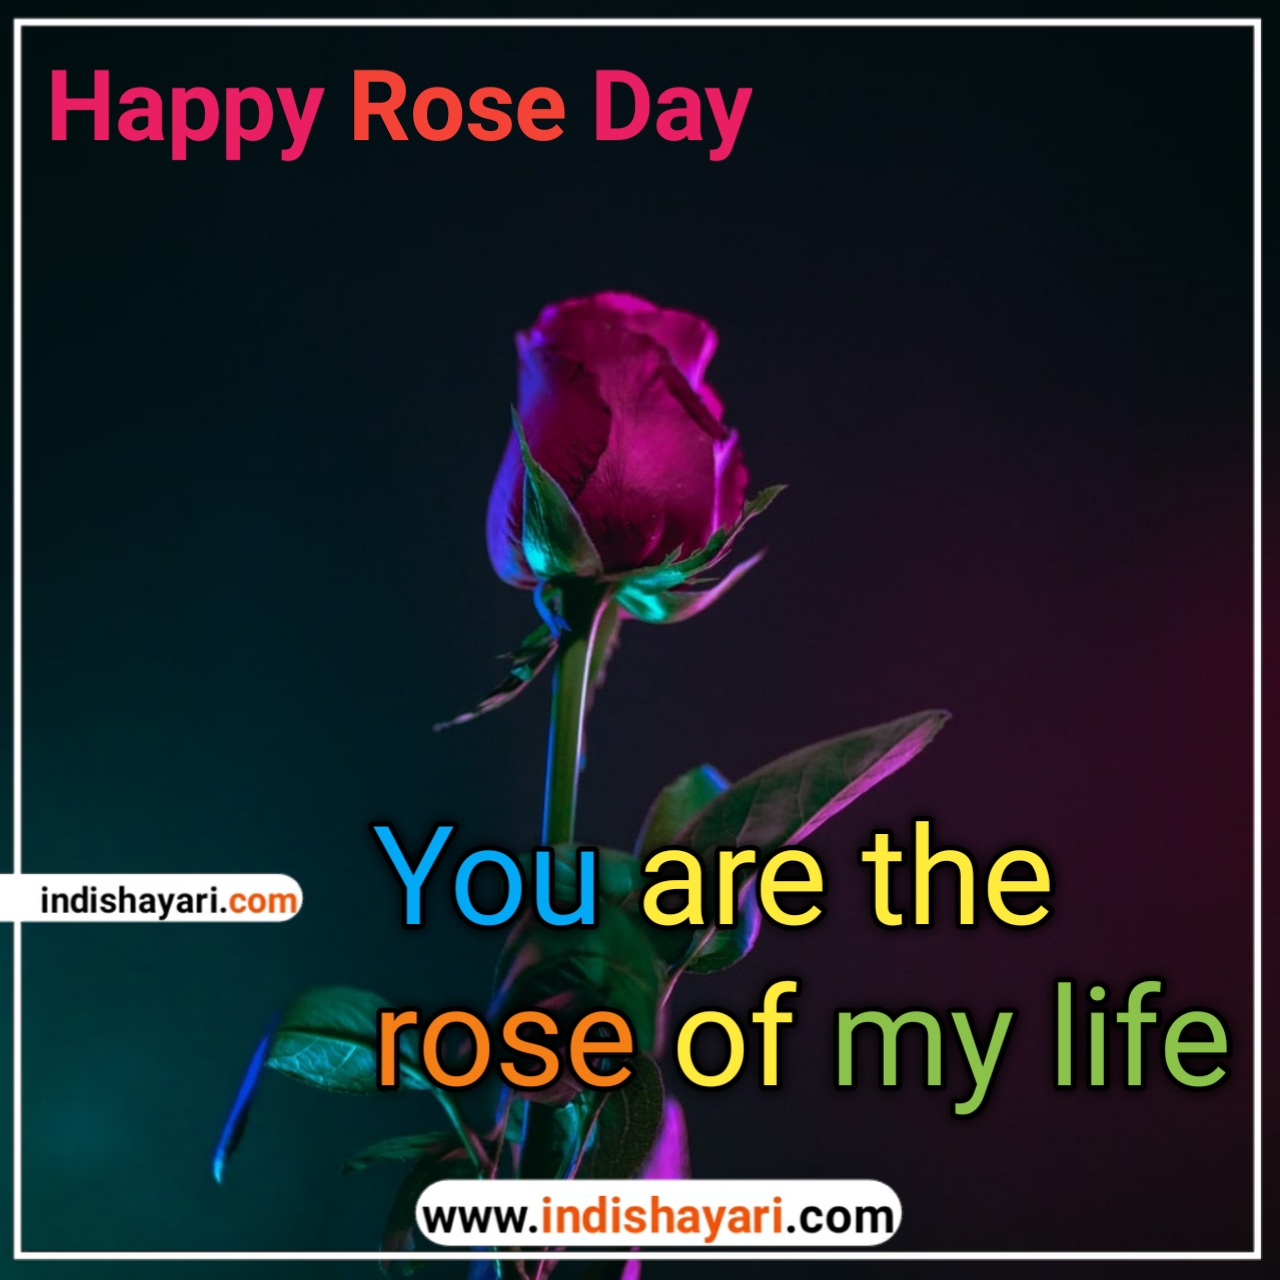 Happy Rose Day  whishes sms quotes for whatsapp Facebook Instagram status